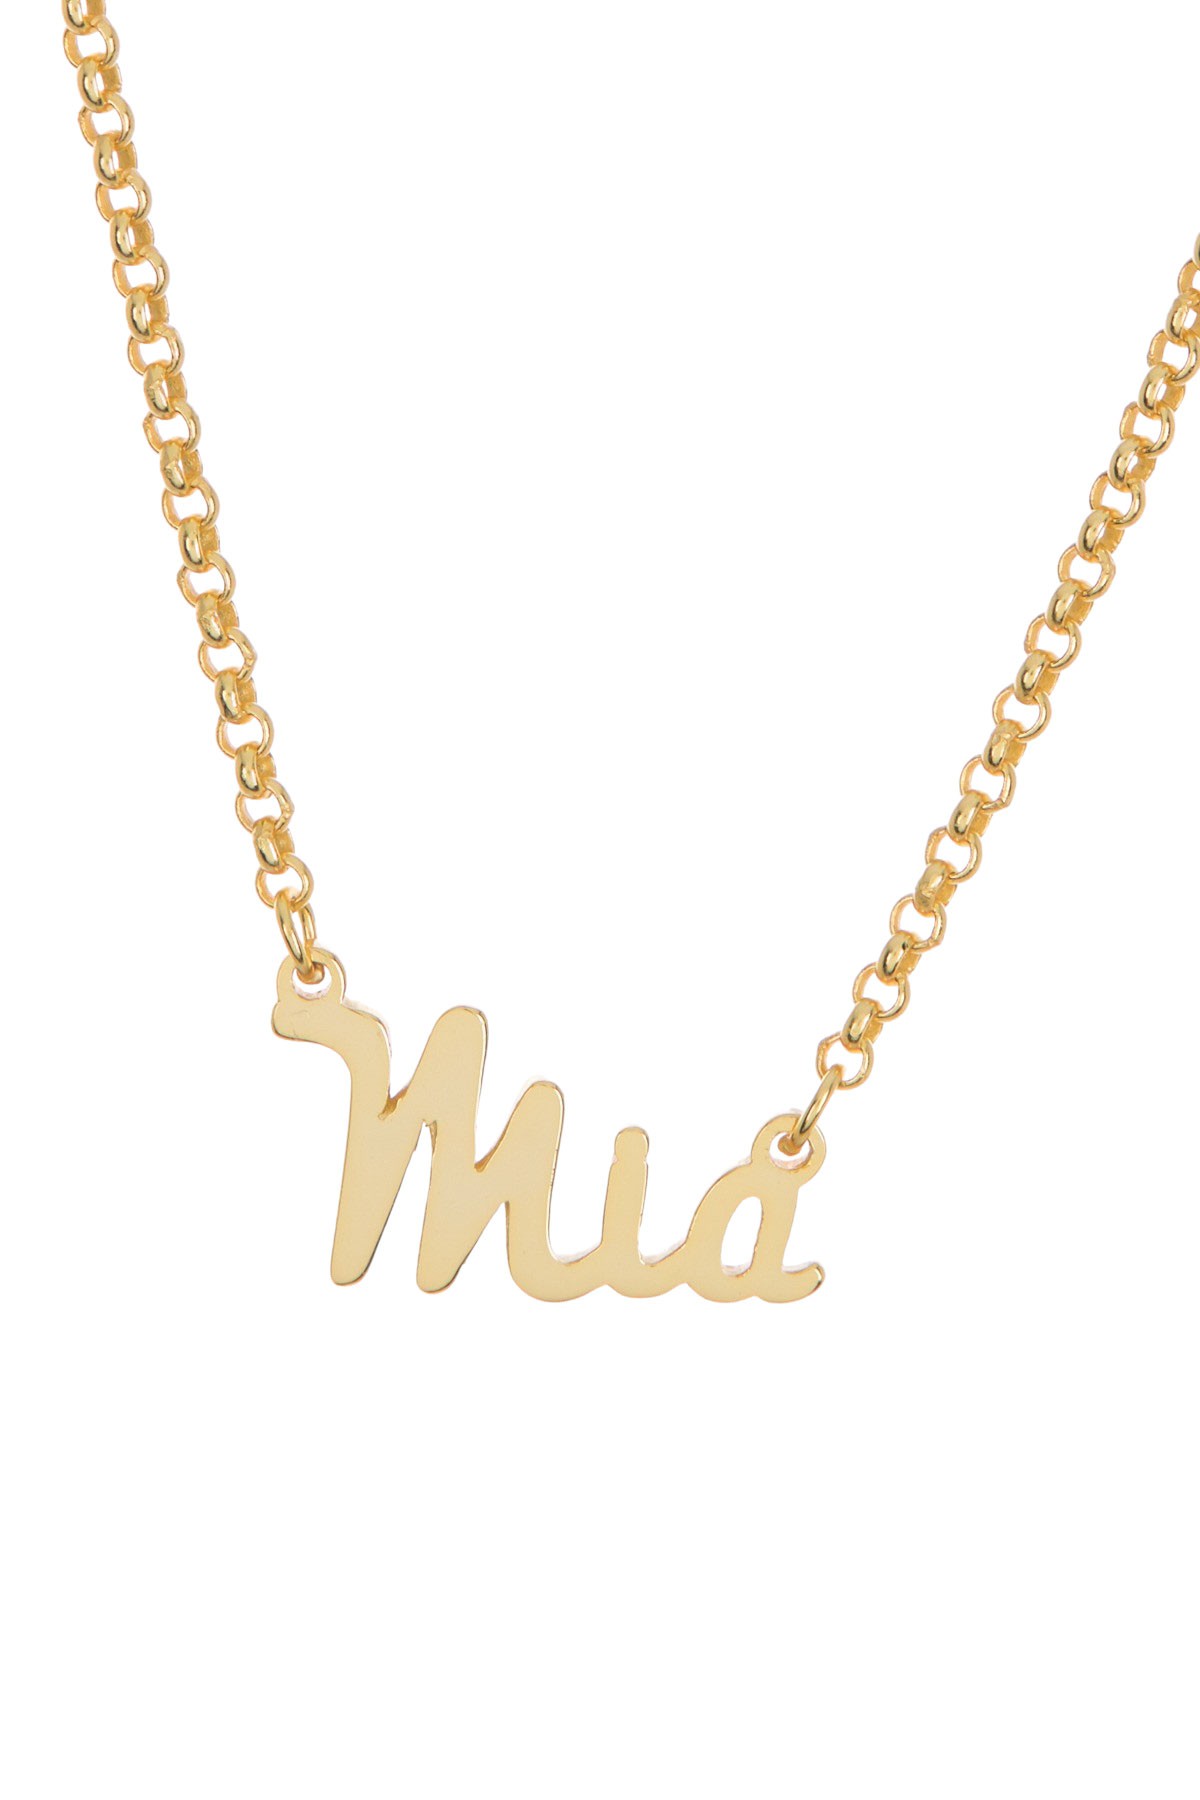 18K Yellow Gold Plated Sterling Silver 'Mia' Name Pendant Necklace Argento Vivo